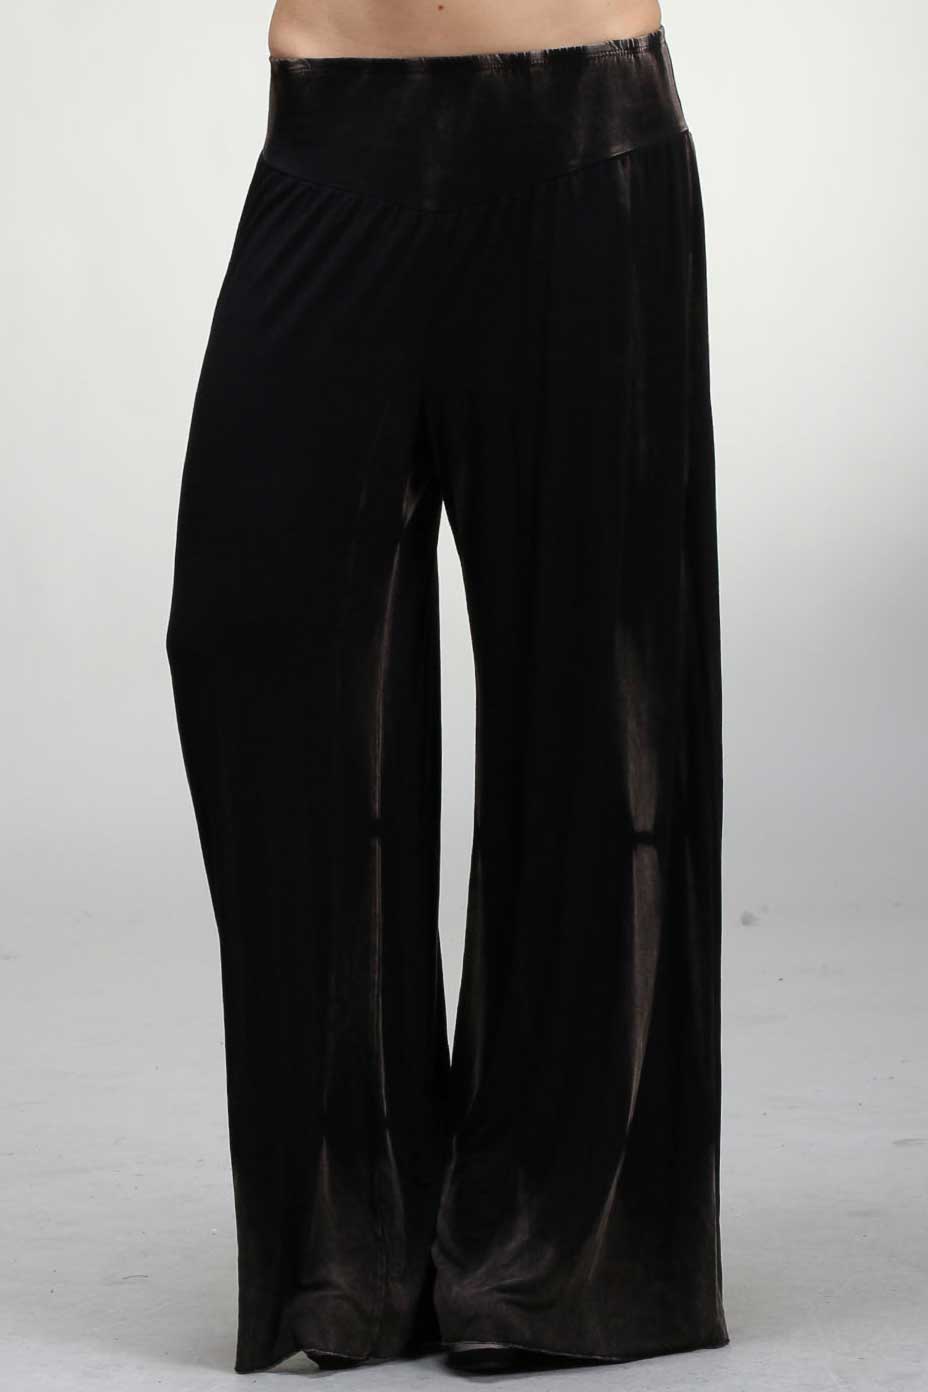  Black Maho Mineral wash Tie dye Palazzo Pants are perfect for any activity.